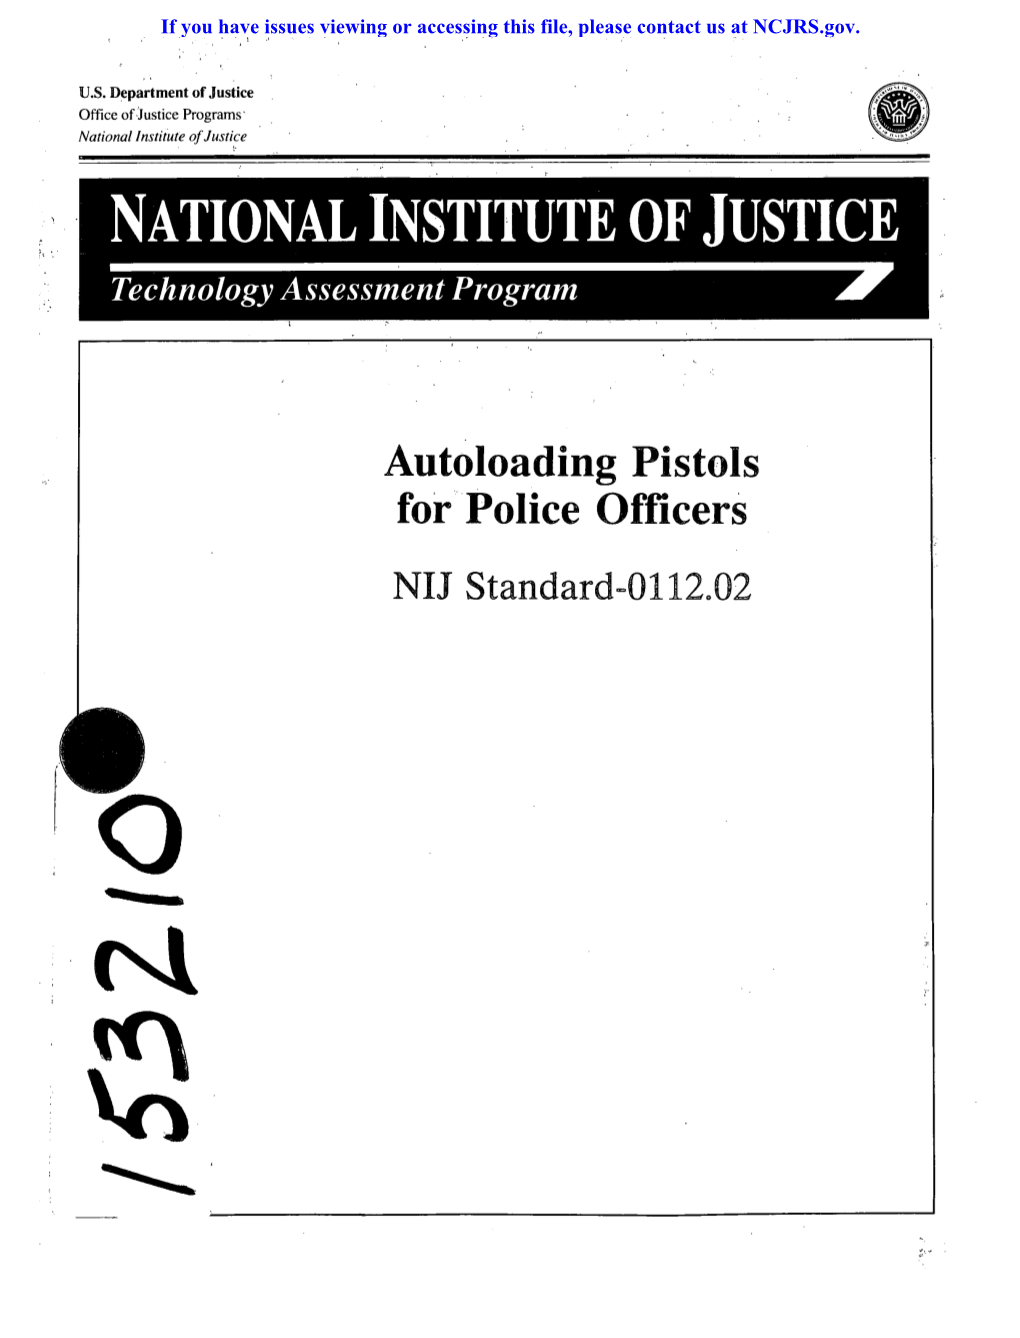 Autoloading Pistols for Police Officers